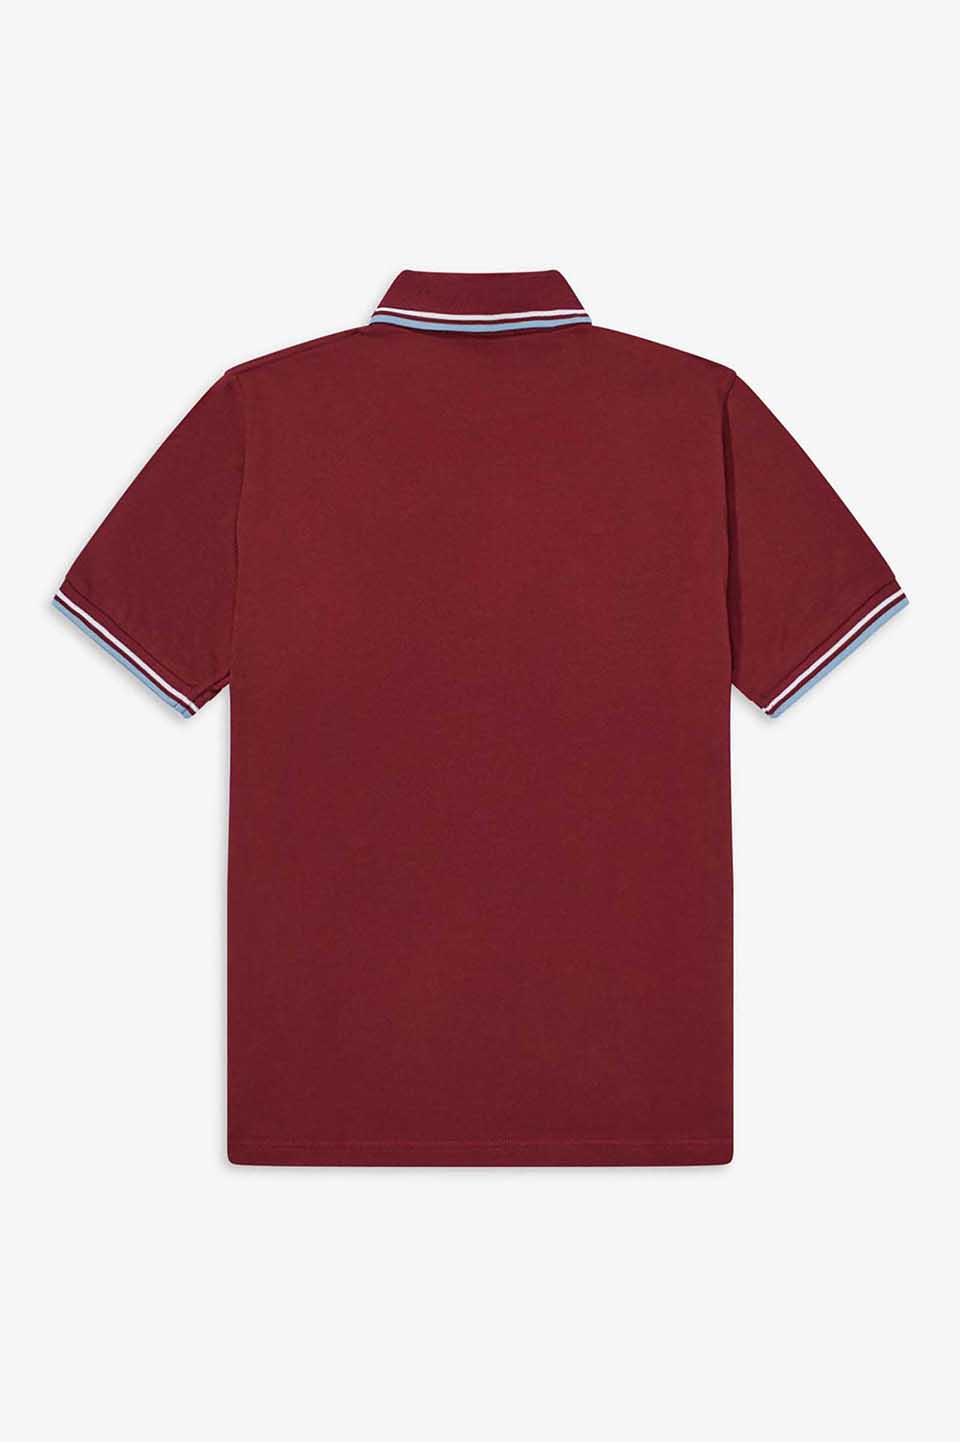 The Fred Perry Shirt - M12(36 106：MAROON / WHITE / ICE): | FRED